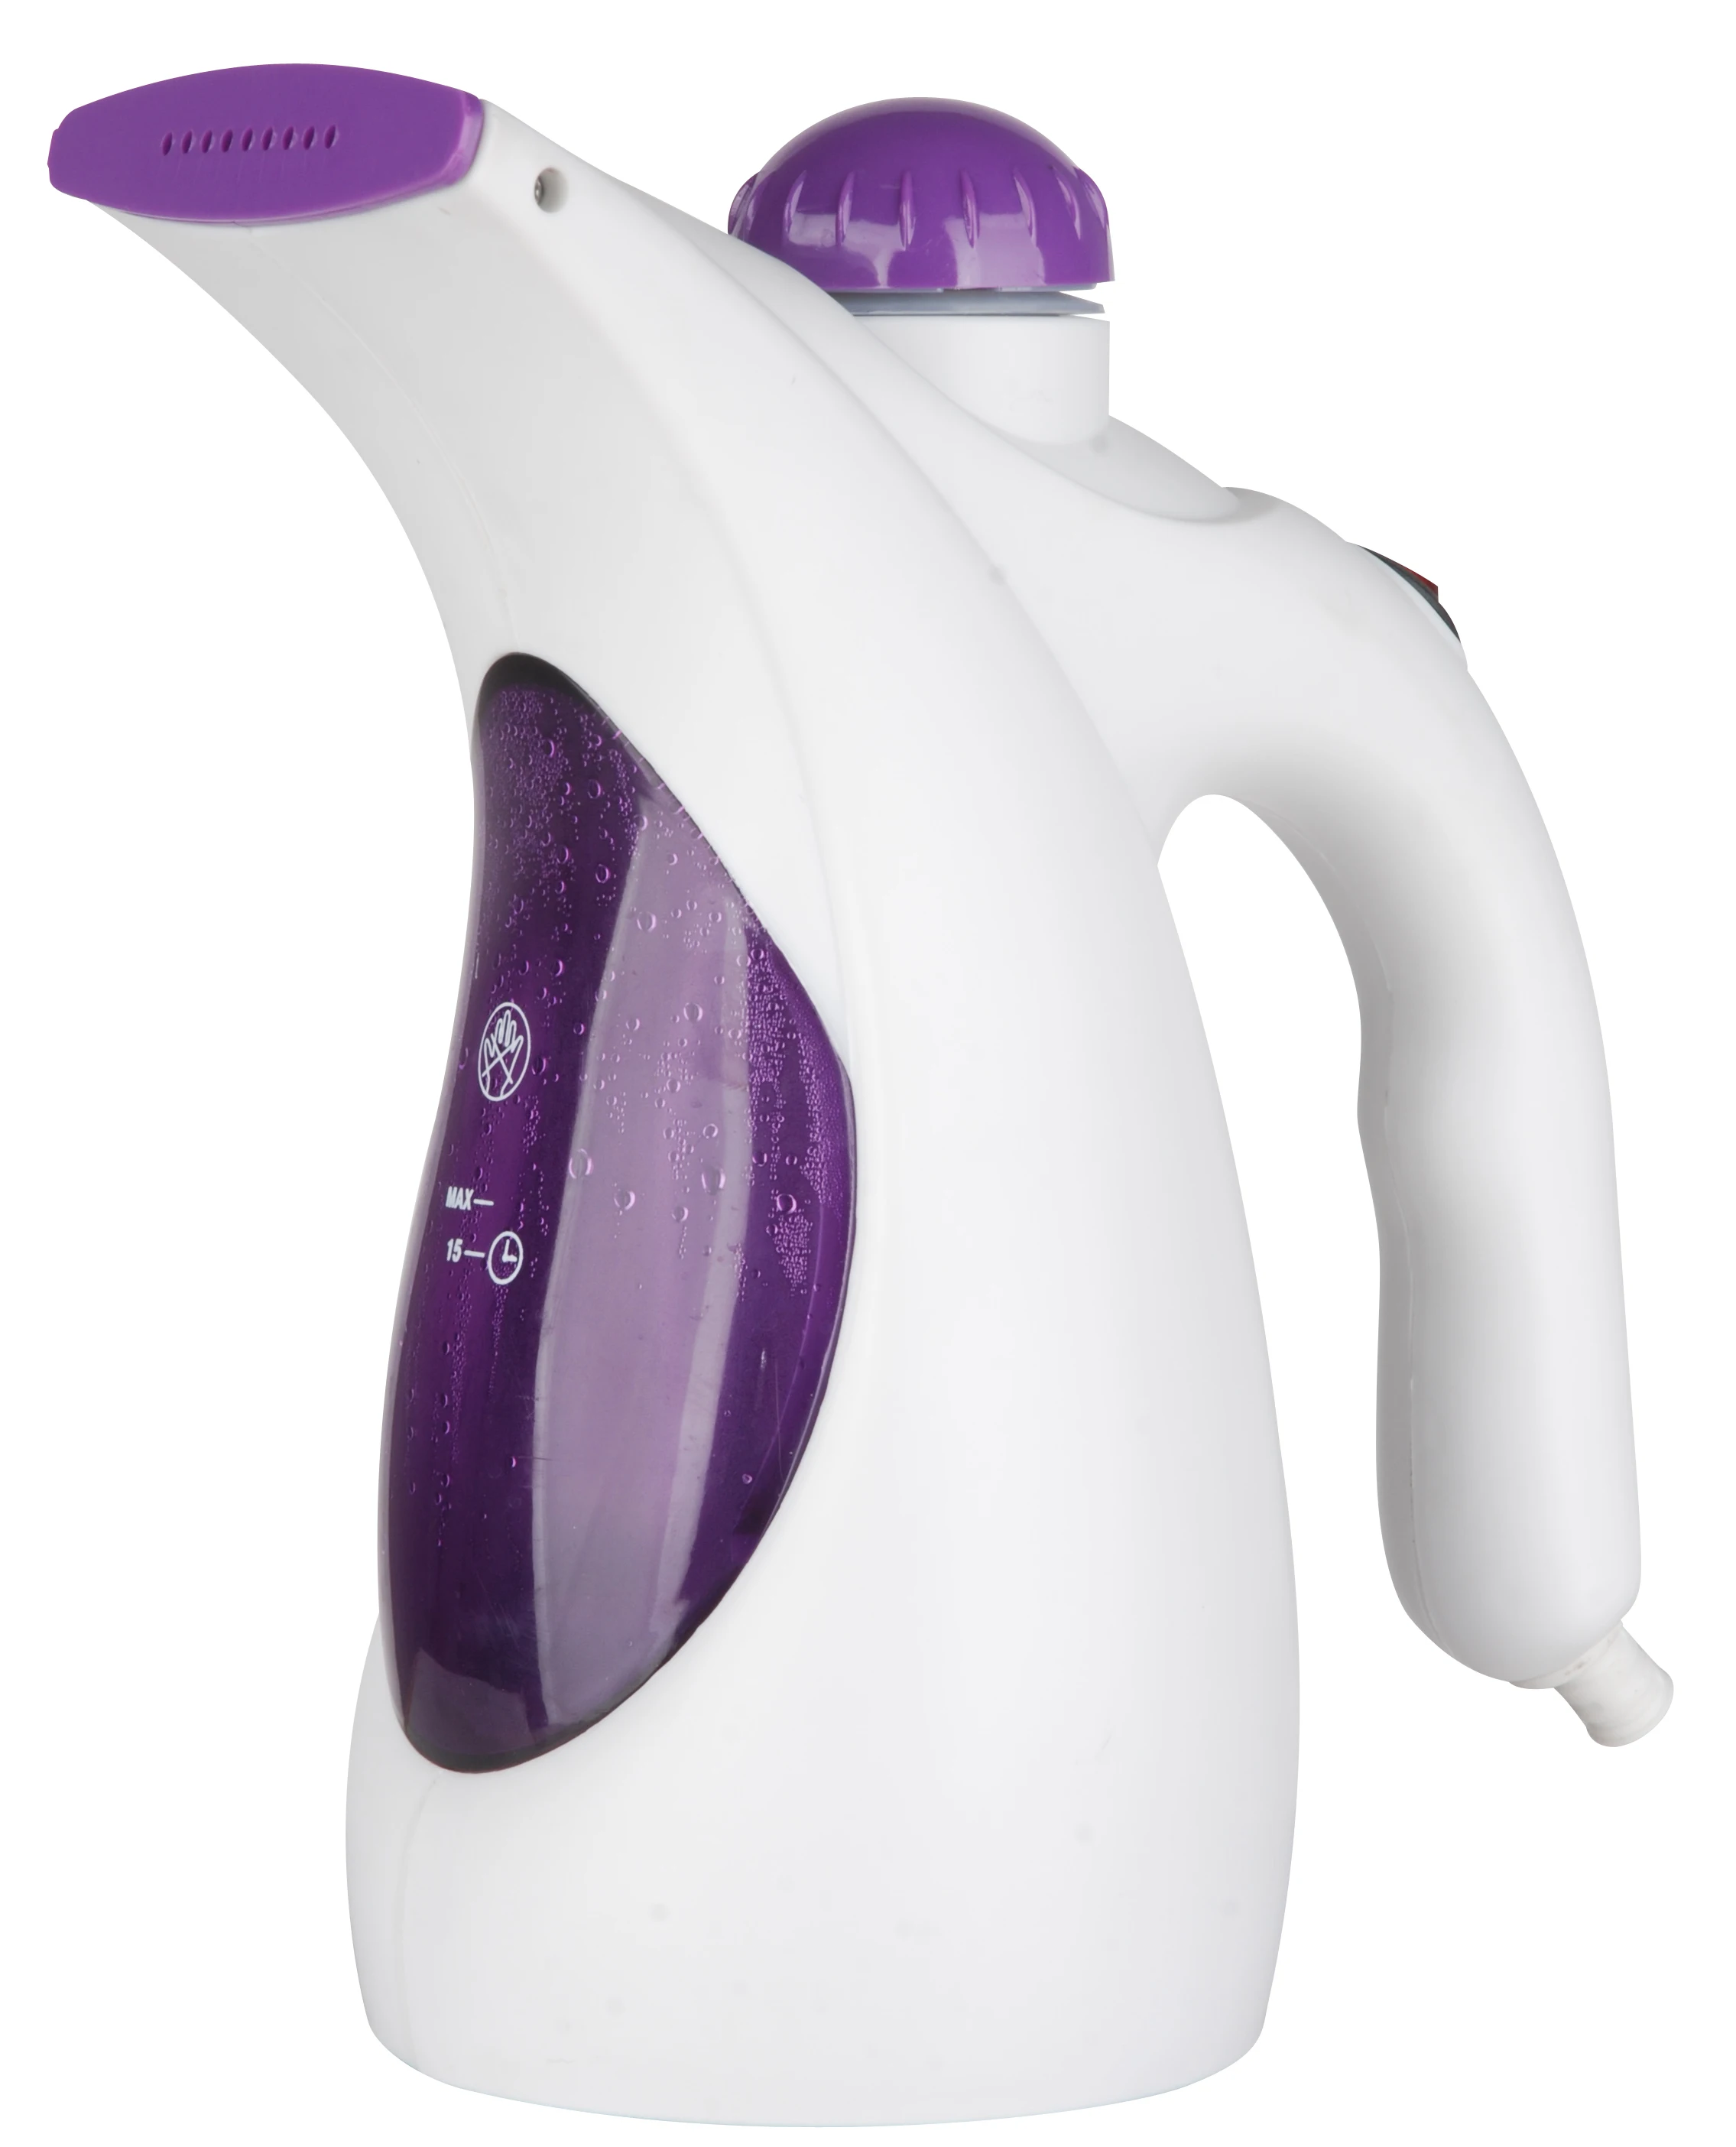 High-quality Hot-selling Steam Generator Reasonably Priced Steam Iron Vertical Steamer